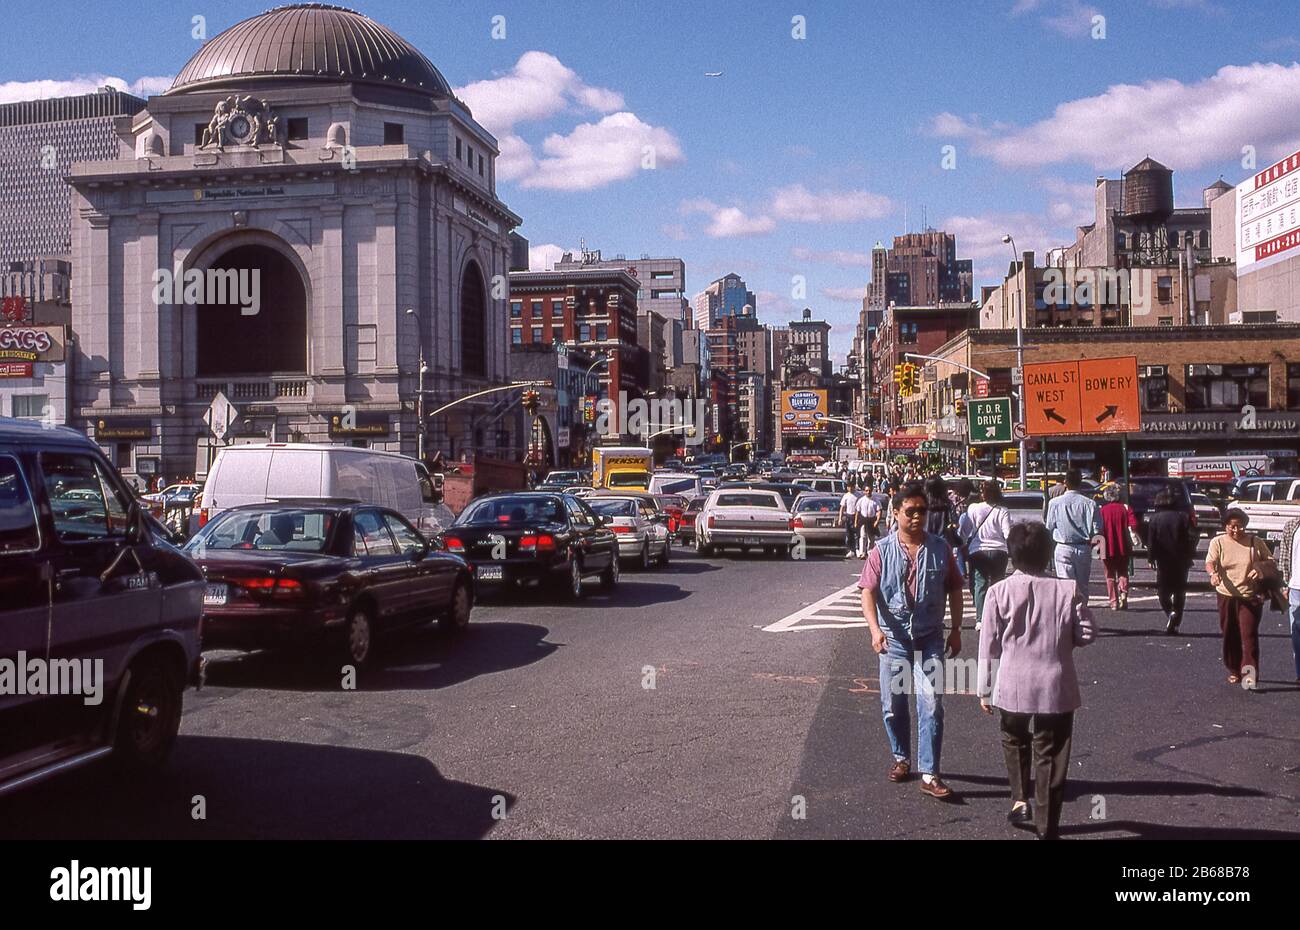 Junction of Canal St West and Bowery, New York City, USA, 1998 Stock Photo